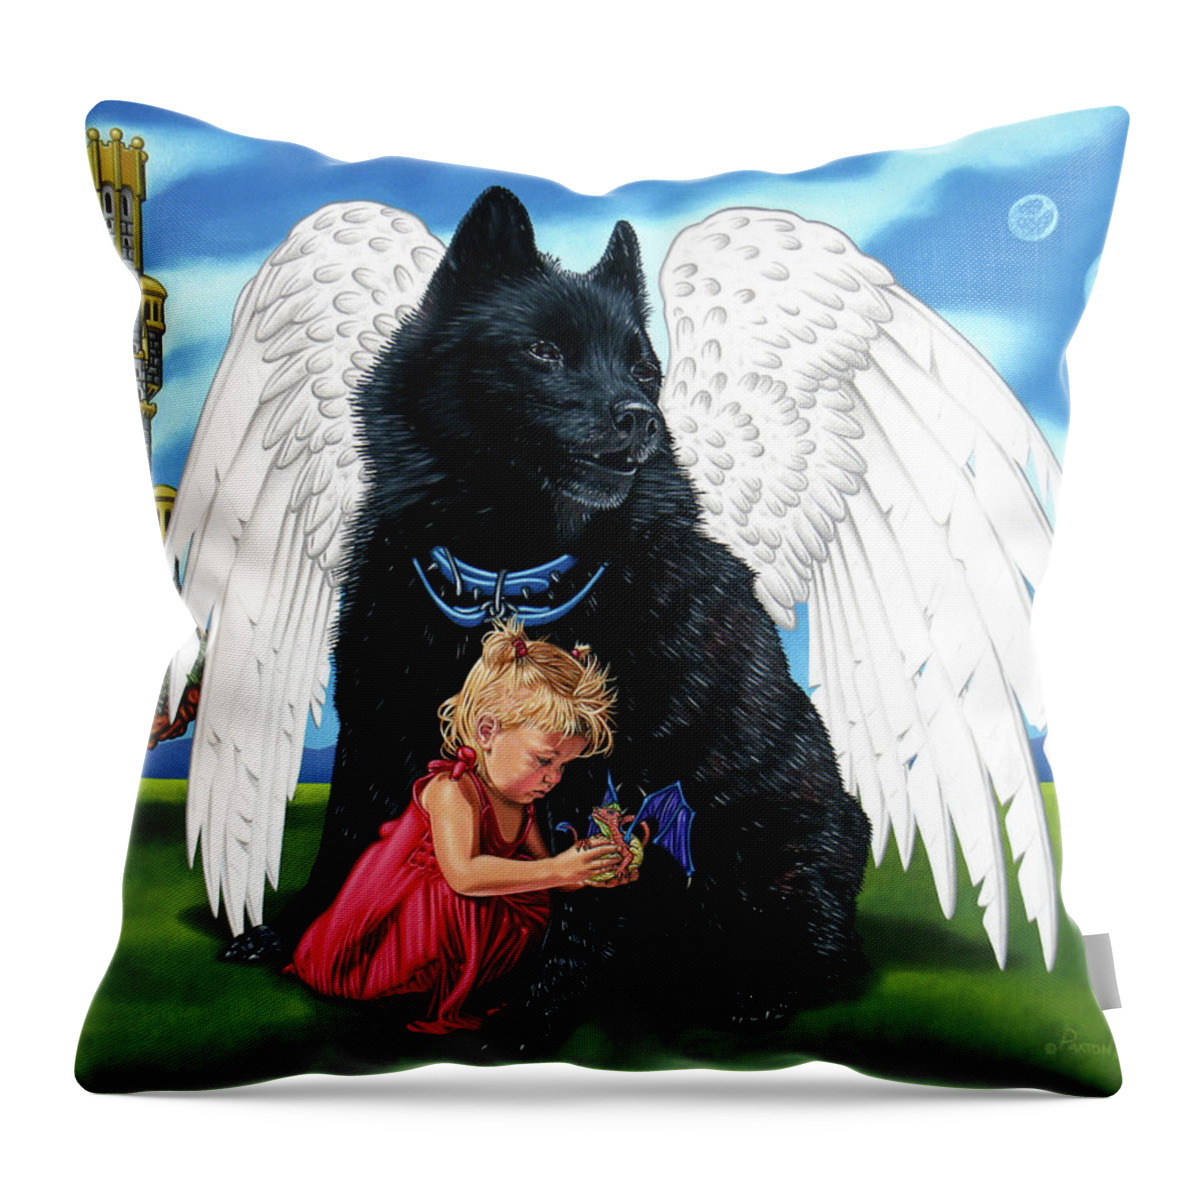  Throw Pillow featuring the painting The Playmate by Paxton Mobley